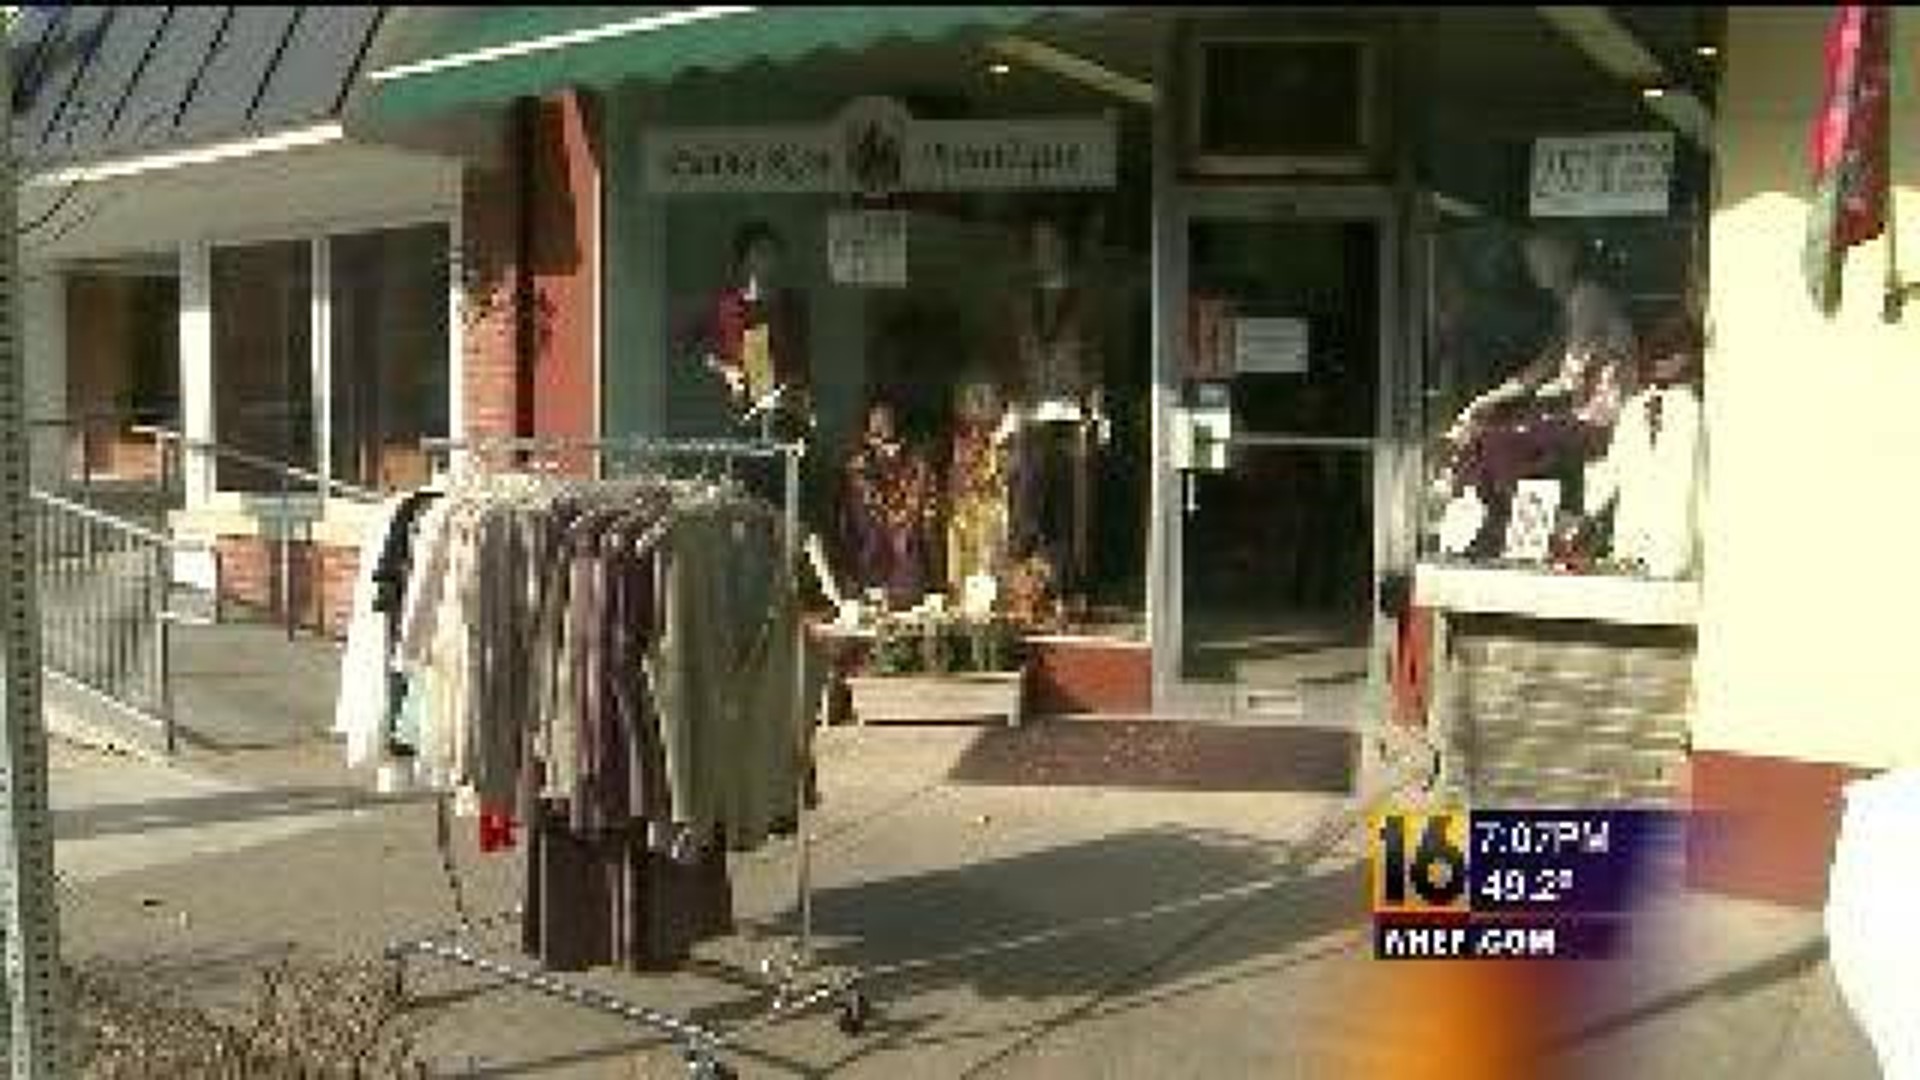 Shoppers Support Small Businesses